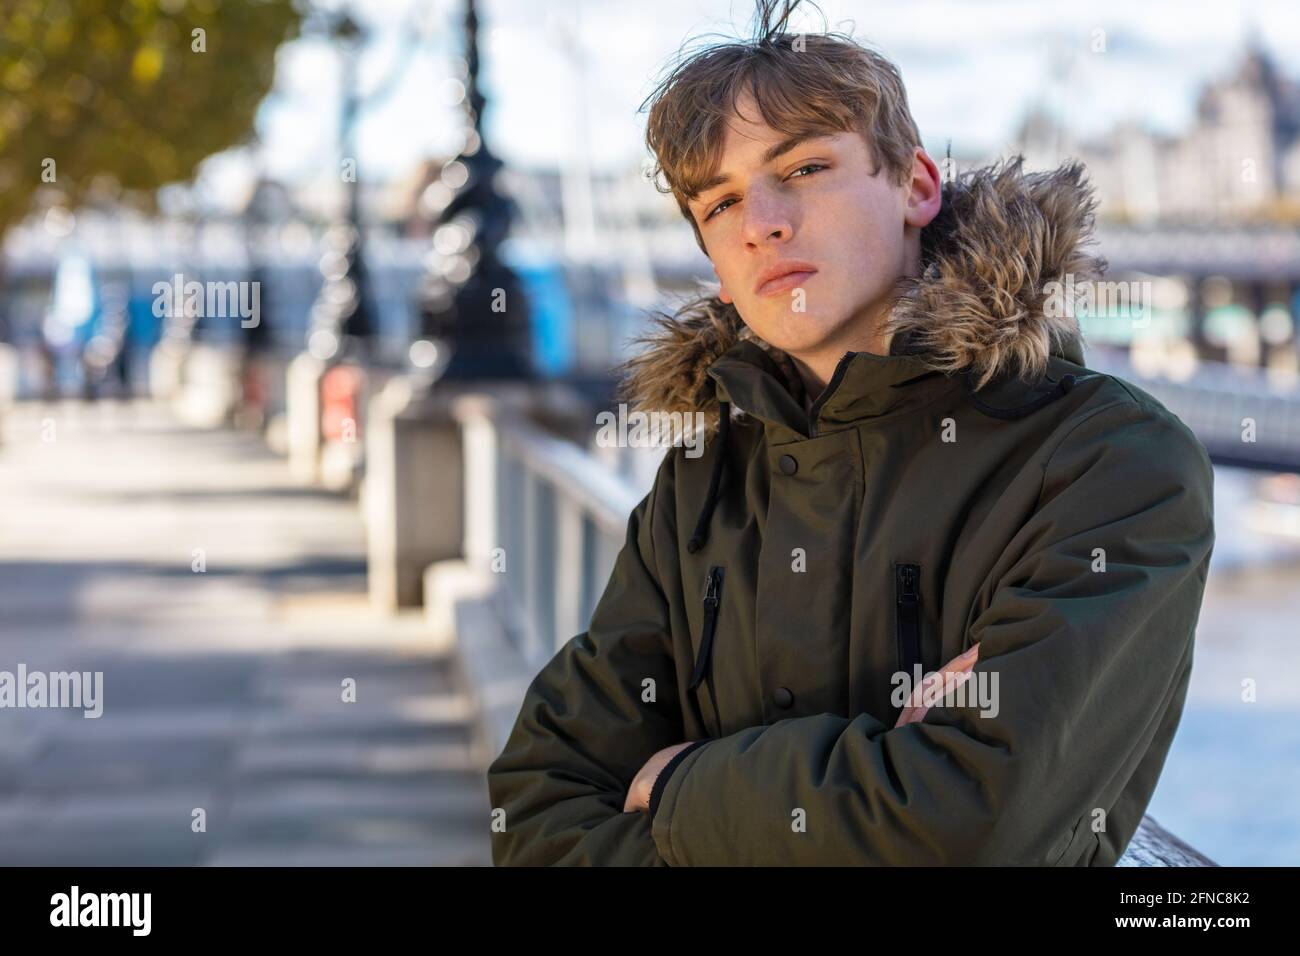 Young adult male boy teenager outside in sunshine wearing a hooded parka coat in an urban city Stock Photo